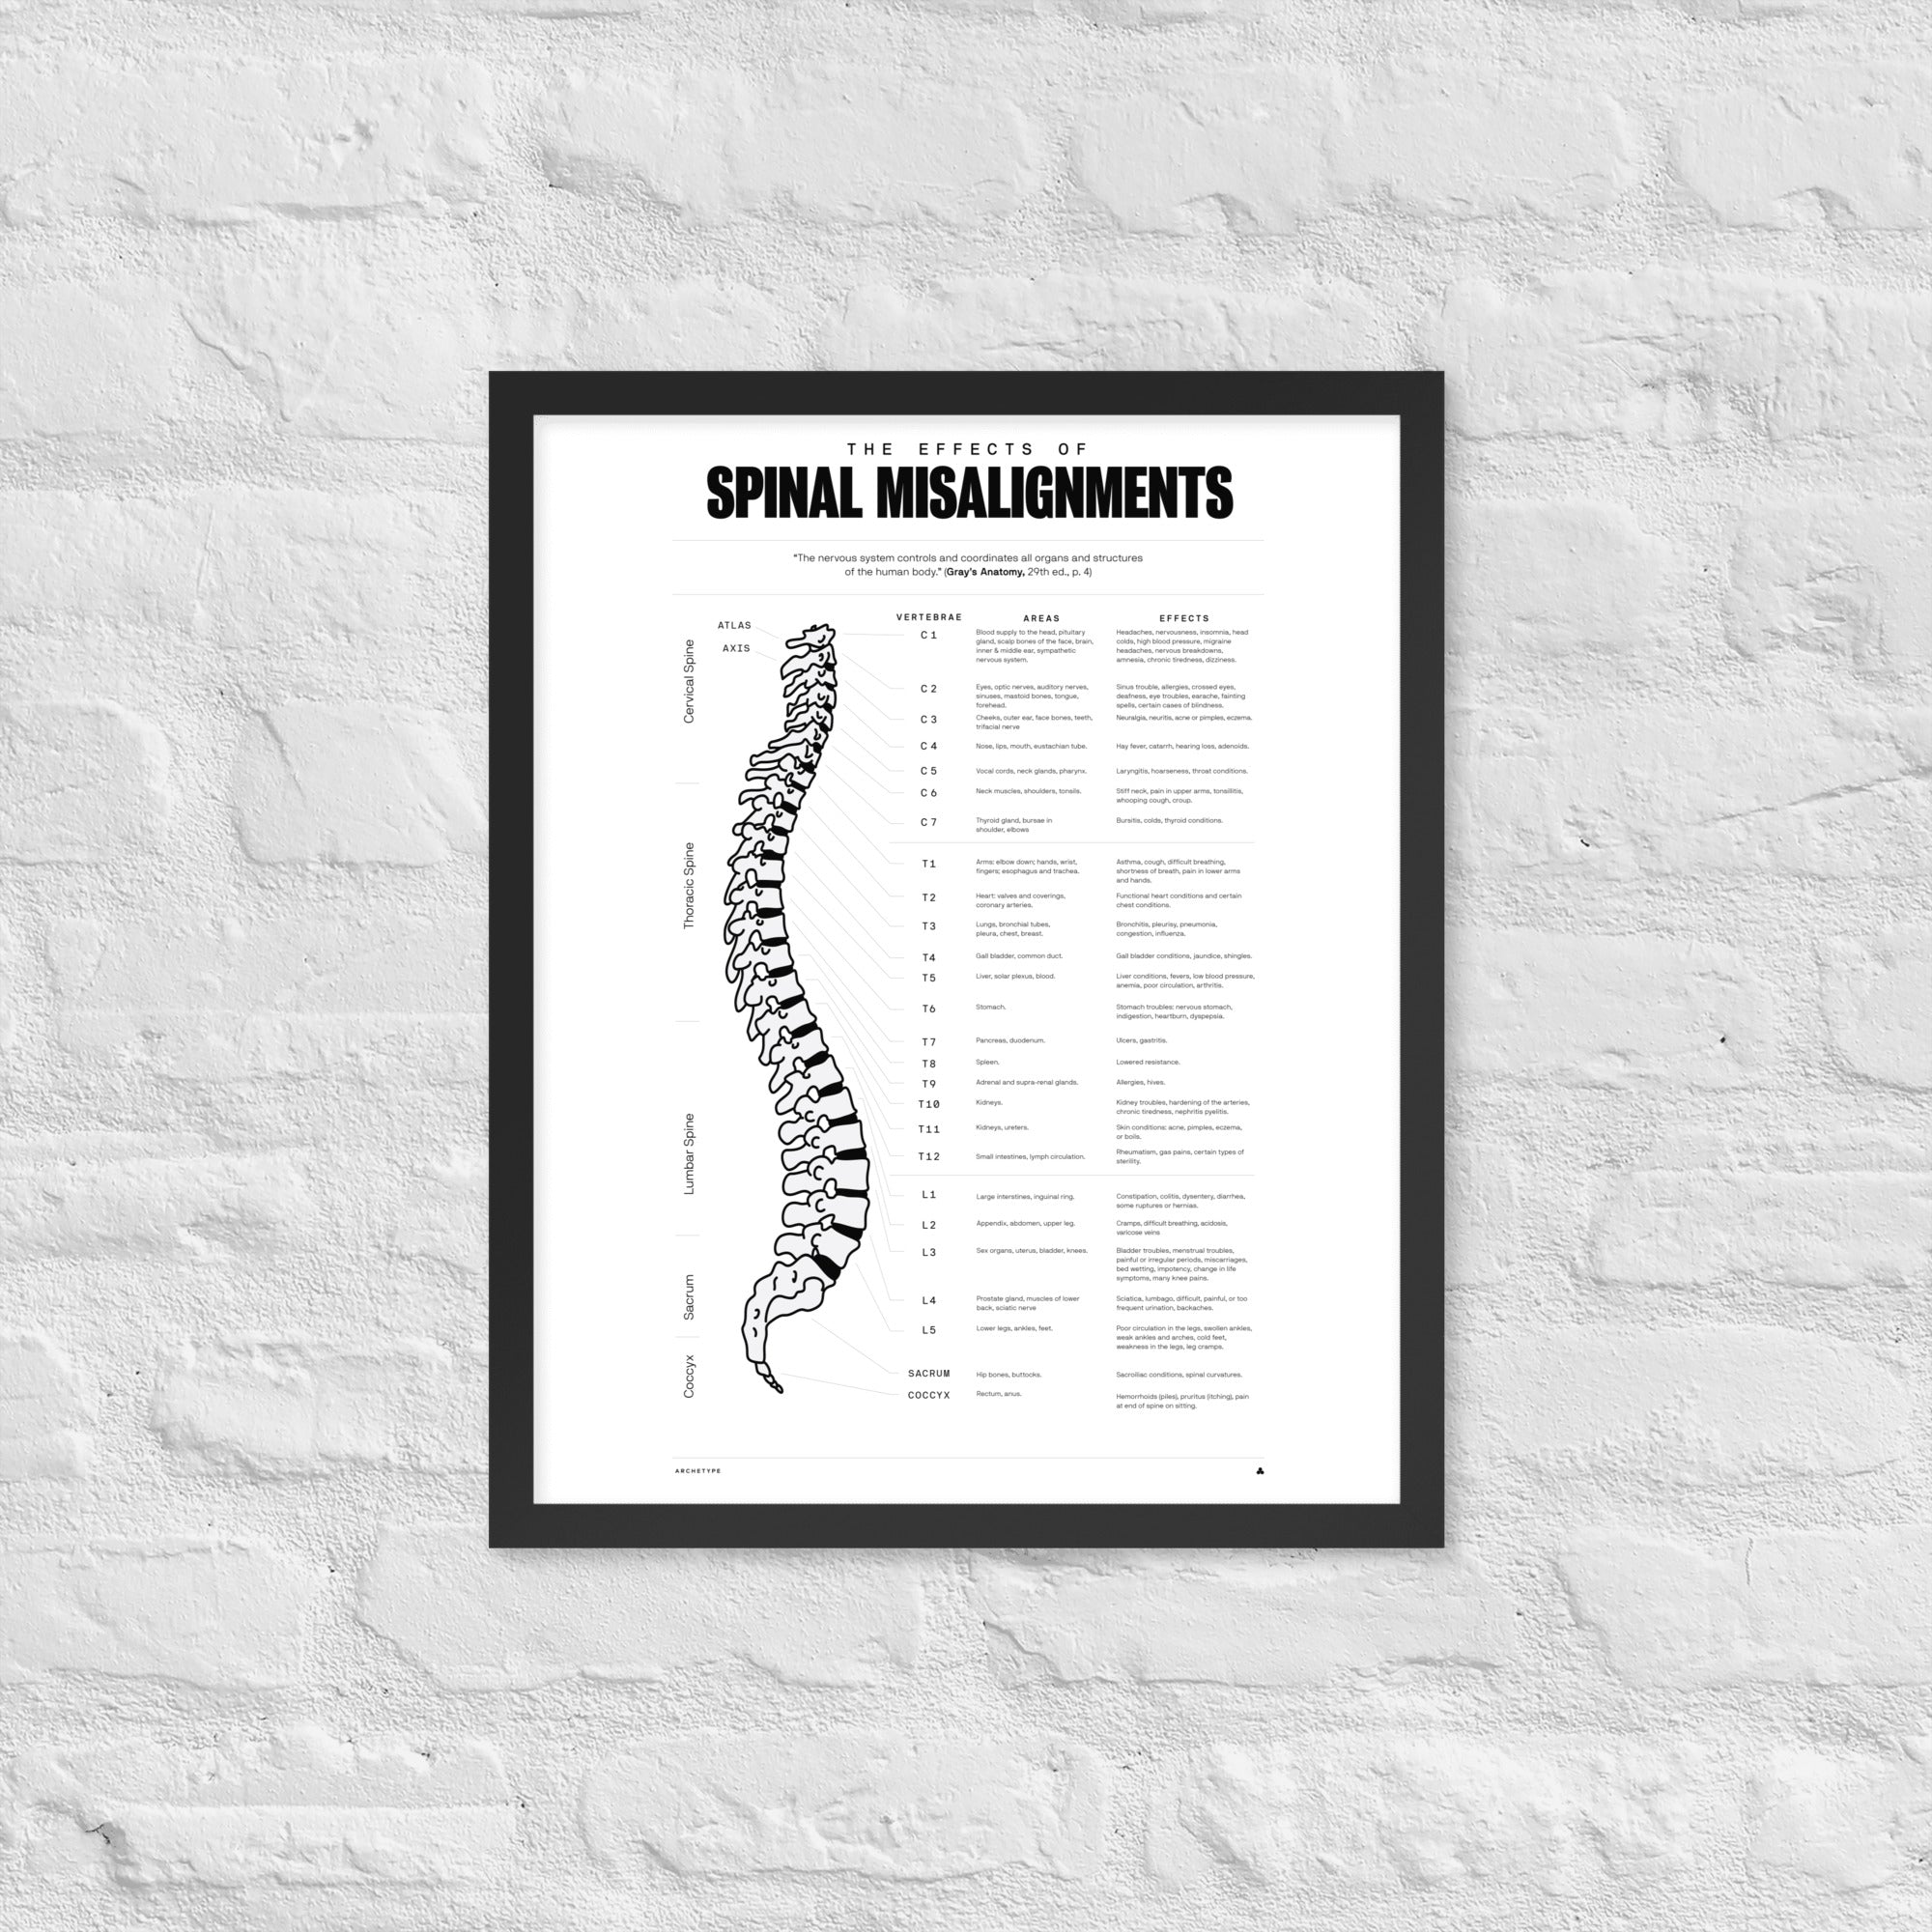 The Effects Of Spinal Misalignment